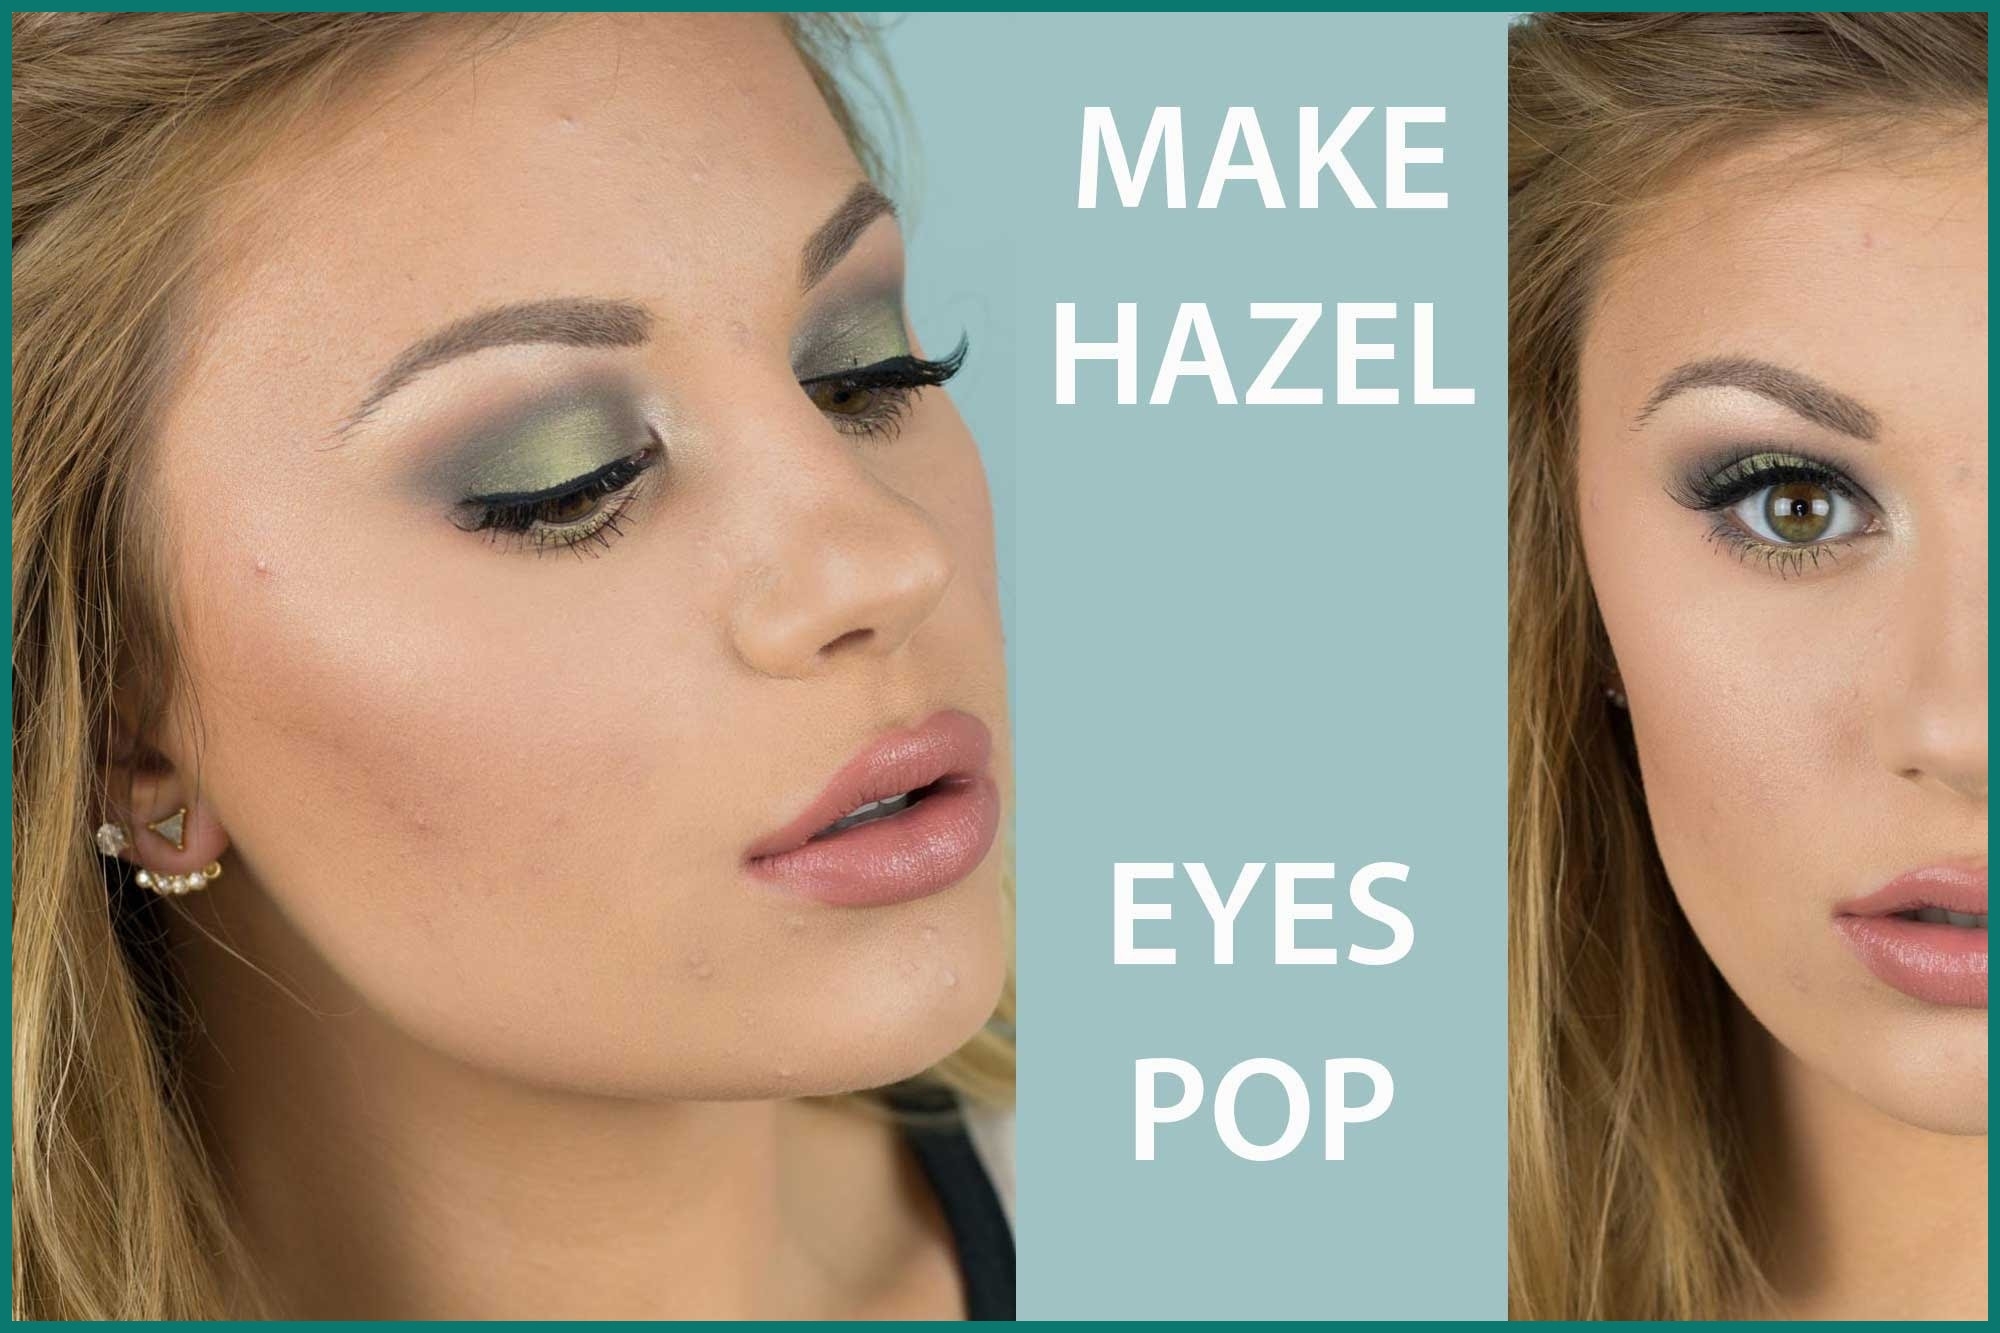 What Color Eyeshadow For Hazel Eyes And Blonde Hair 39802 throughout Eyeshadow For Hazel Eyes And Blonde Hair